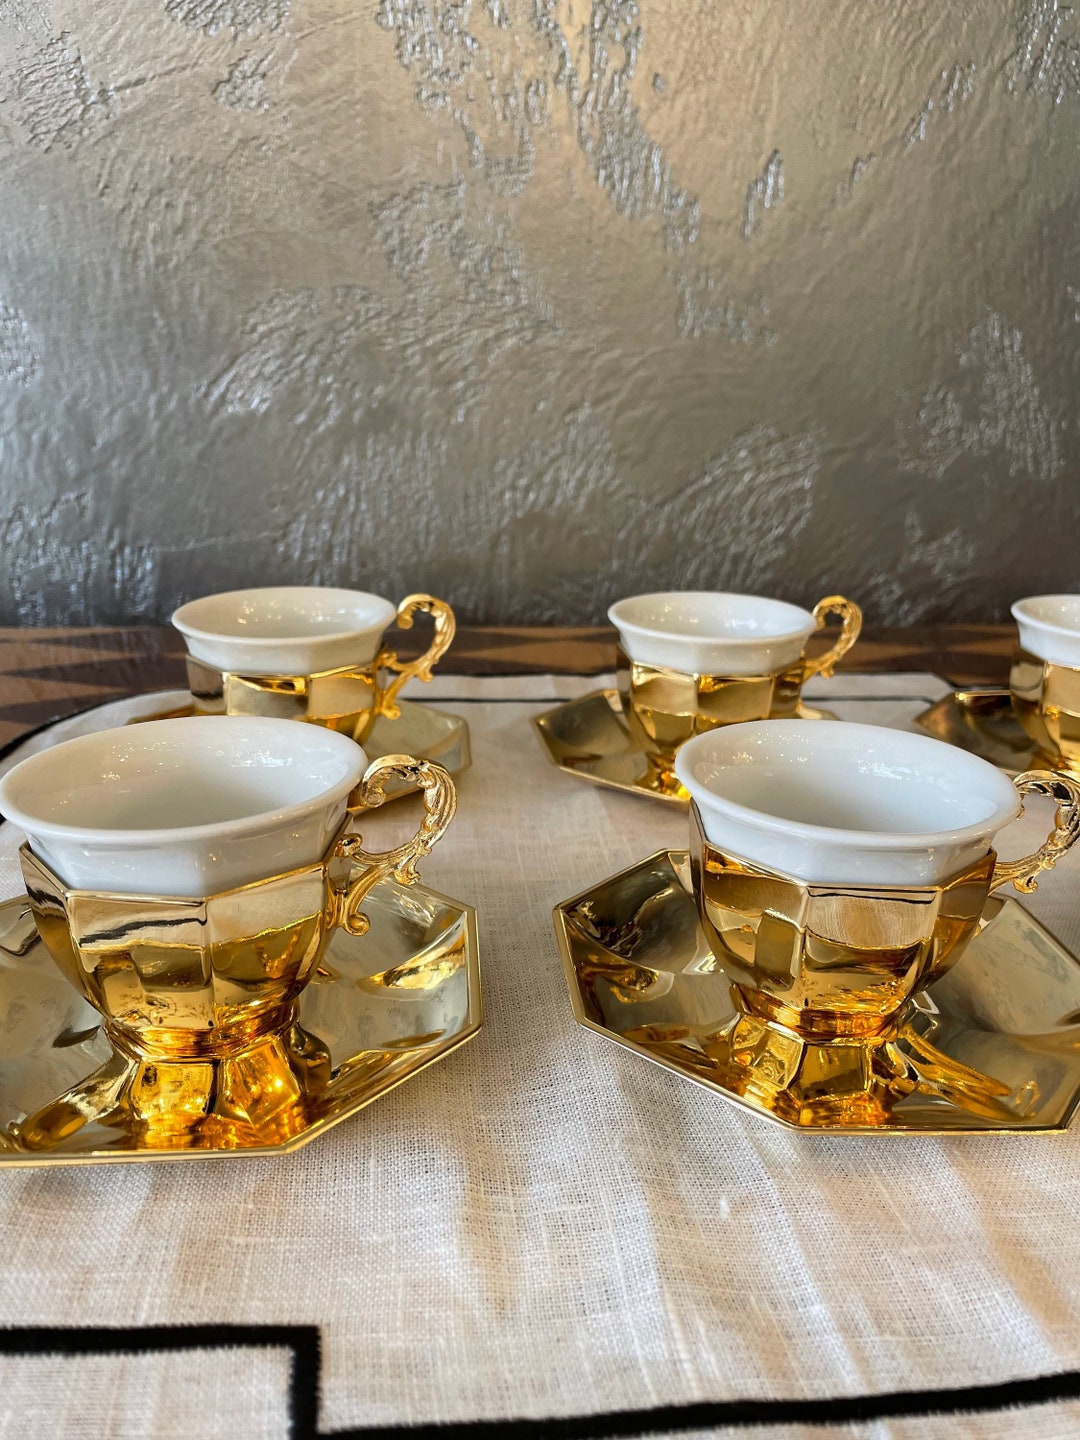 Wholesale Arabic Coffee Cup Glass Teacup Turkish Tea Cup Sets - China  Glassware and Coffee Cup price